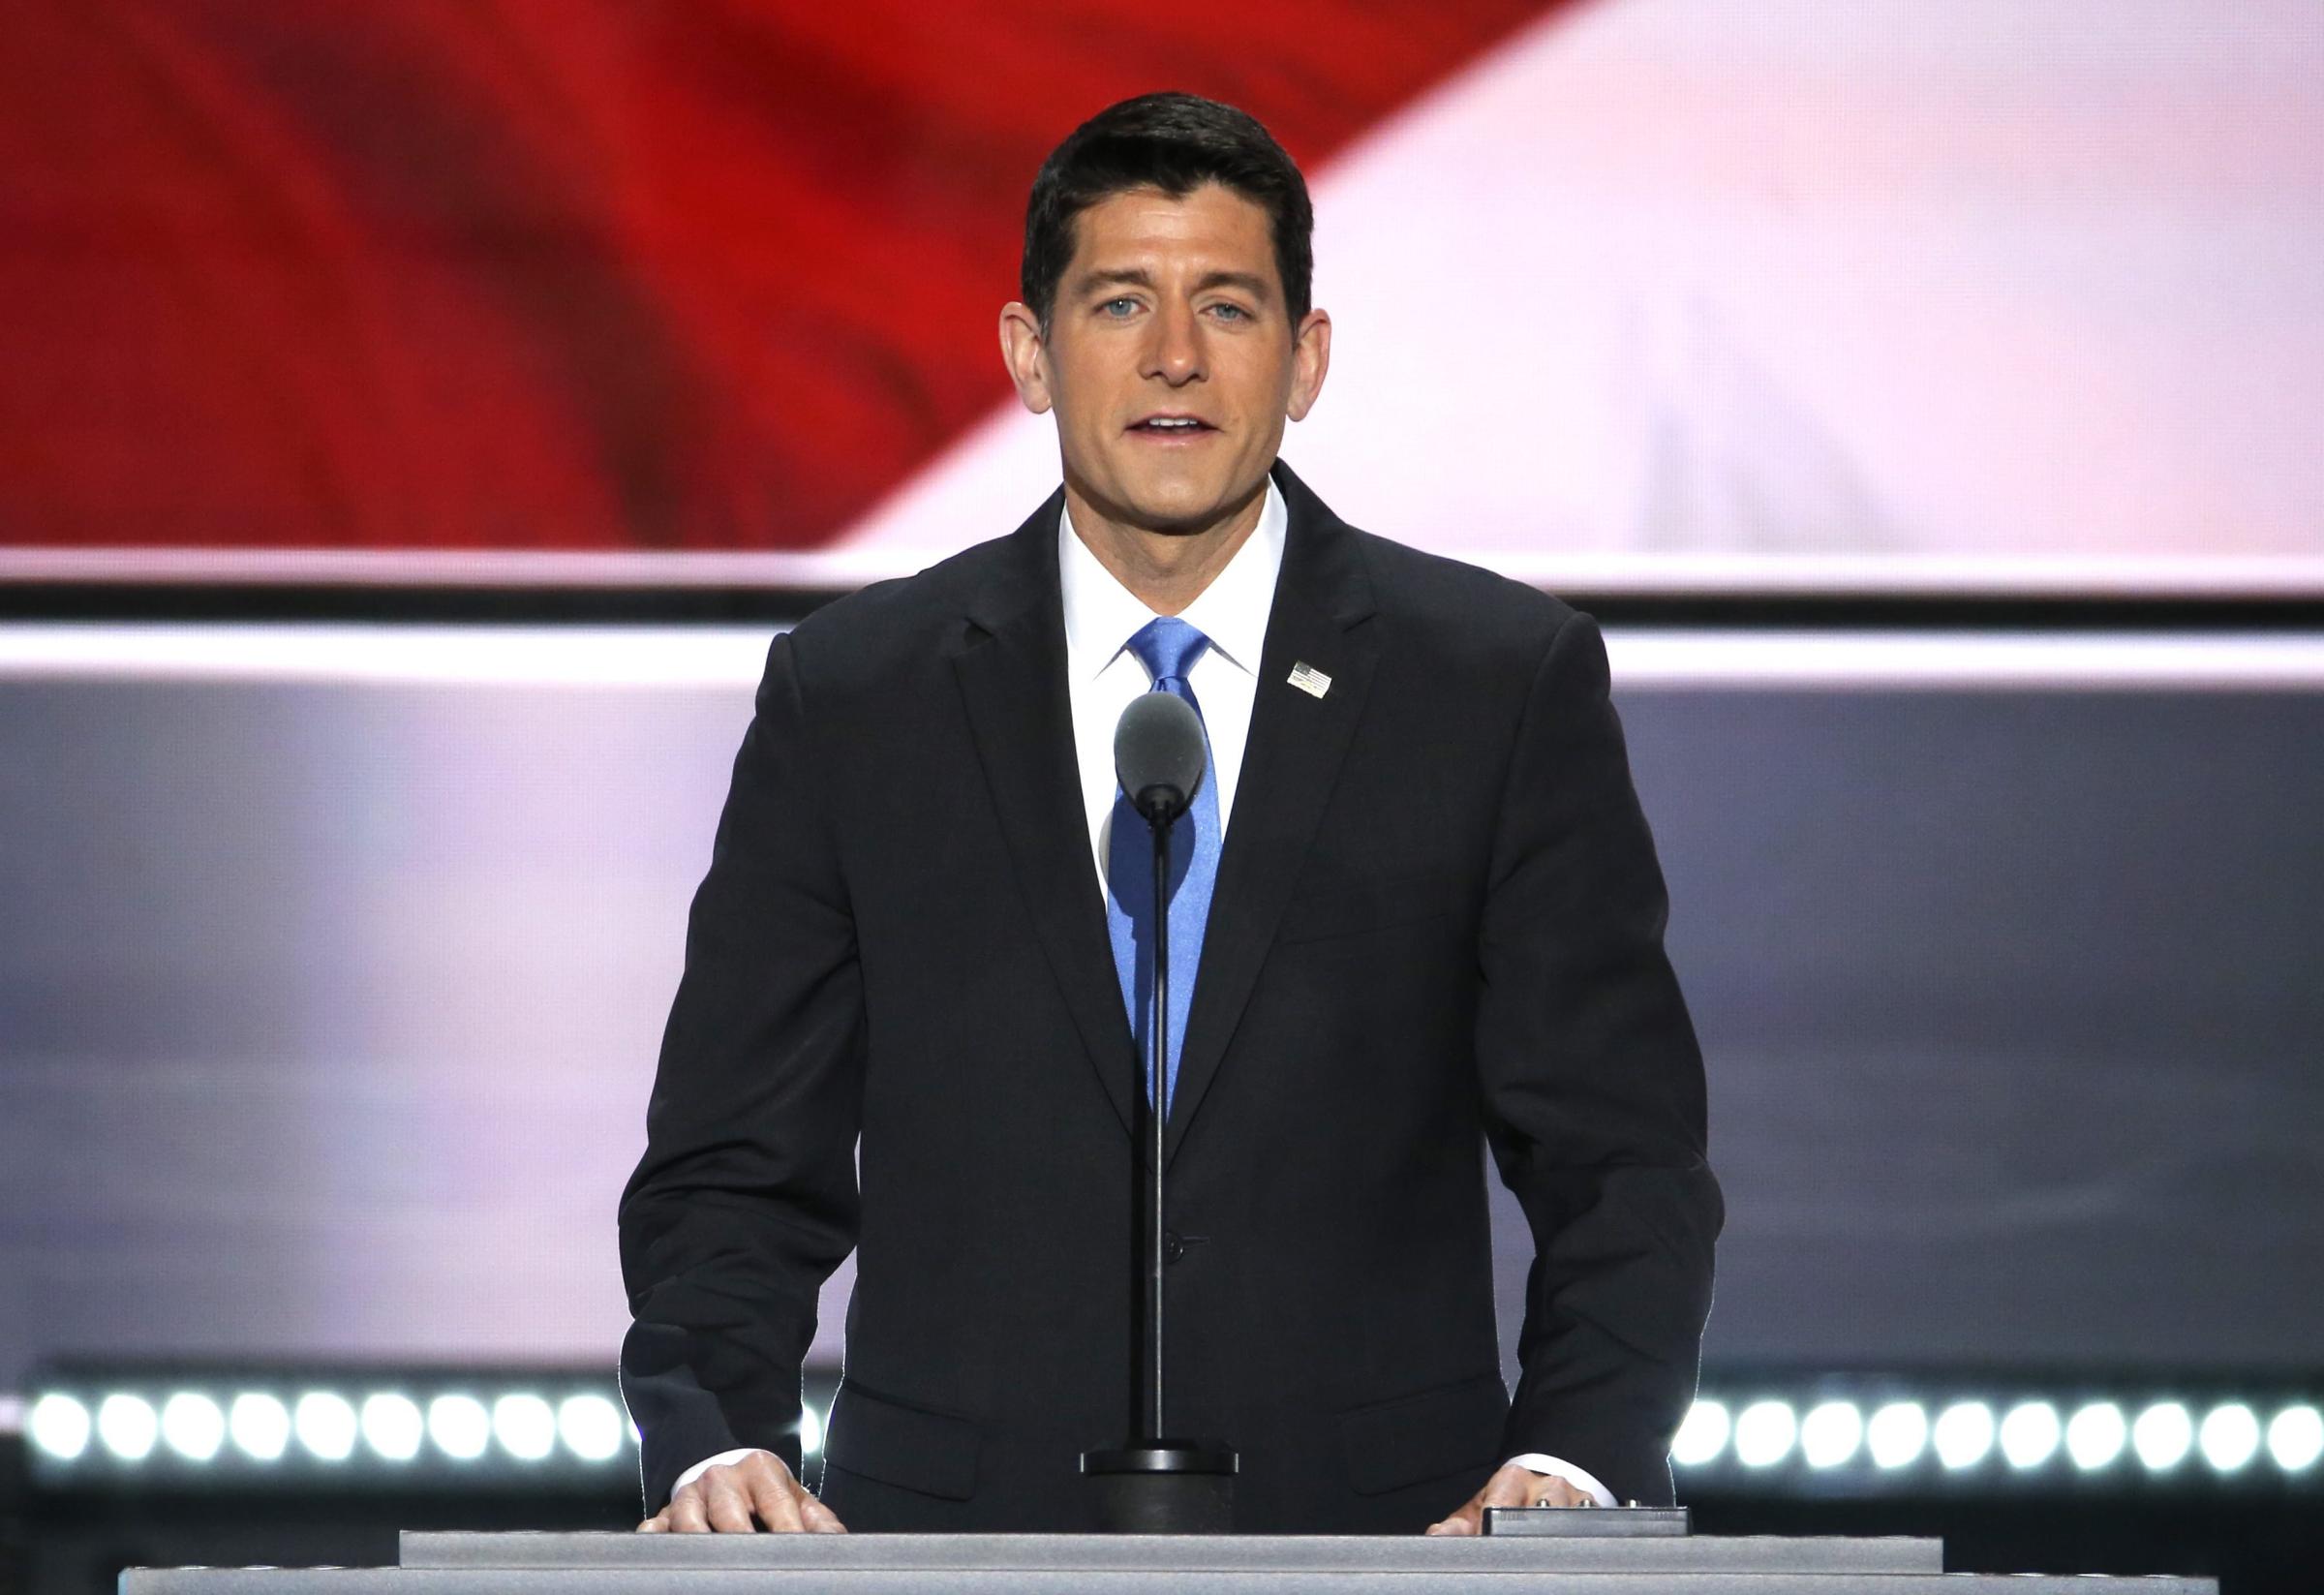 Speaker of the House and Permanent Chair of the Republican National Convention Paul Ryan delivers remarks on stage at the Quicken Loans Arena on the second day of the 2016 Republican National Convention in Cleveland, July 19, 2016.